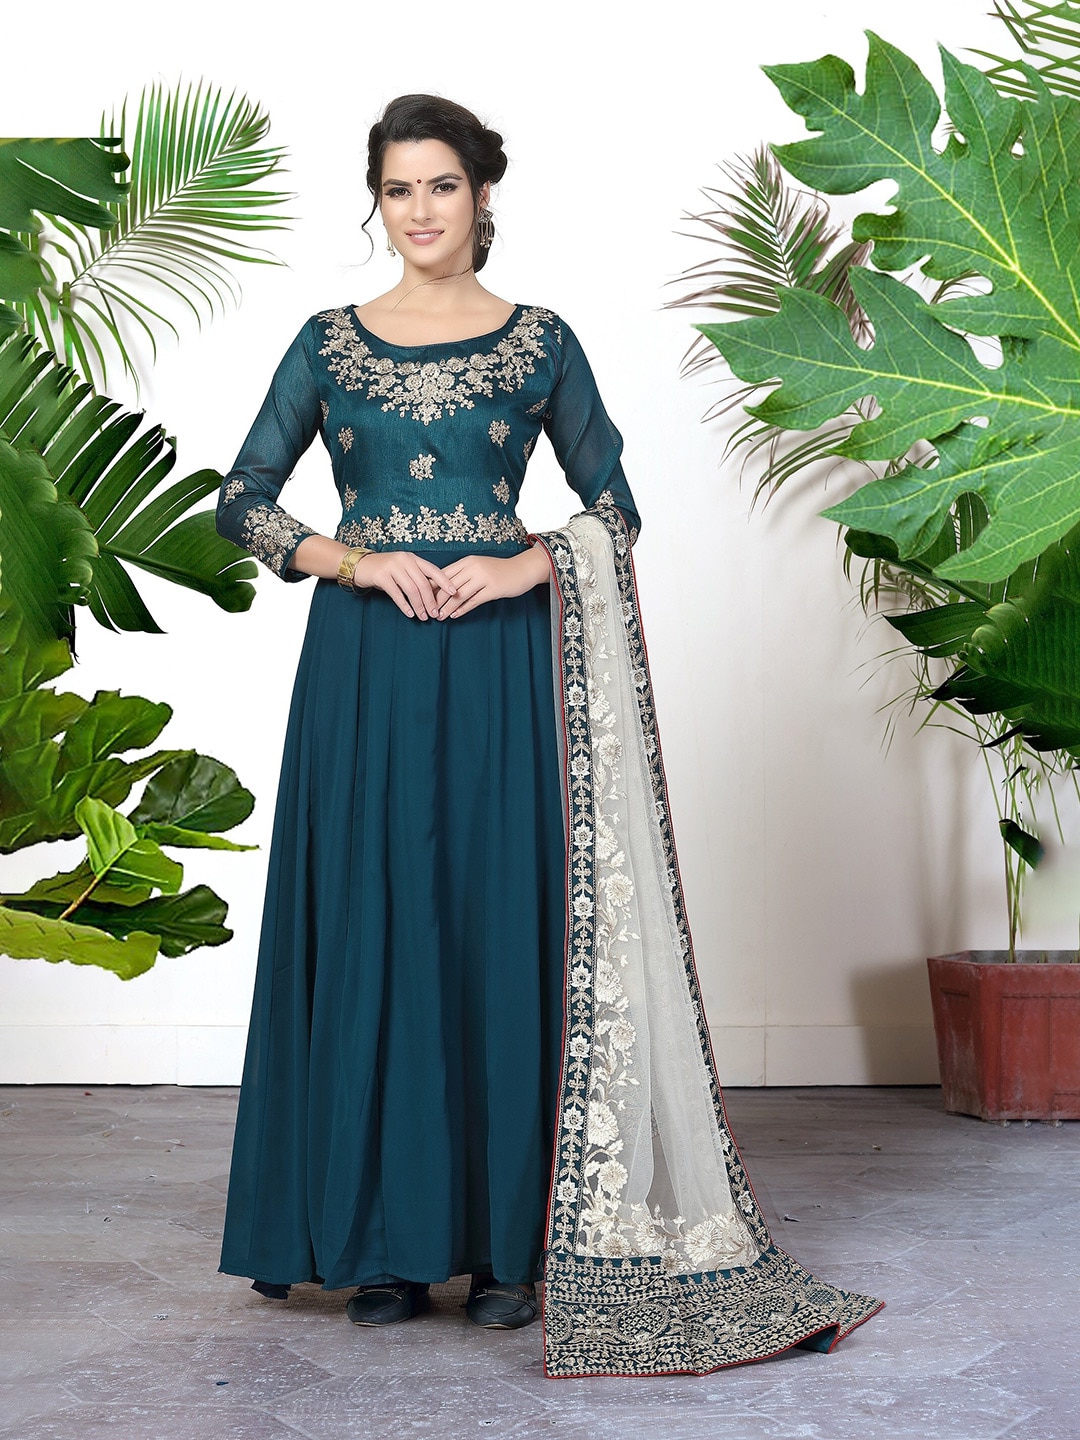 Divine International Trading Co Turquoise Blue & Gold-Toned Semi-Stitched Dress Material Price in India